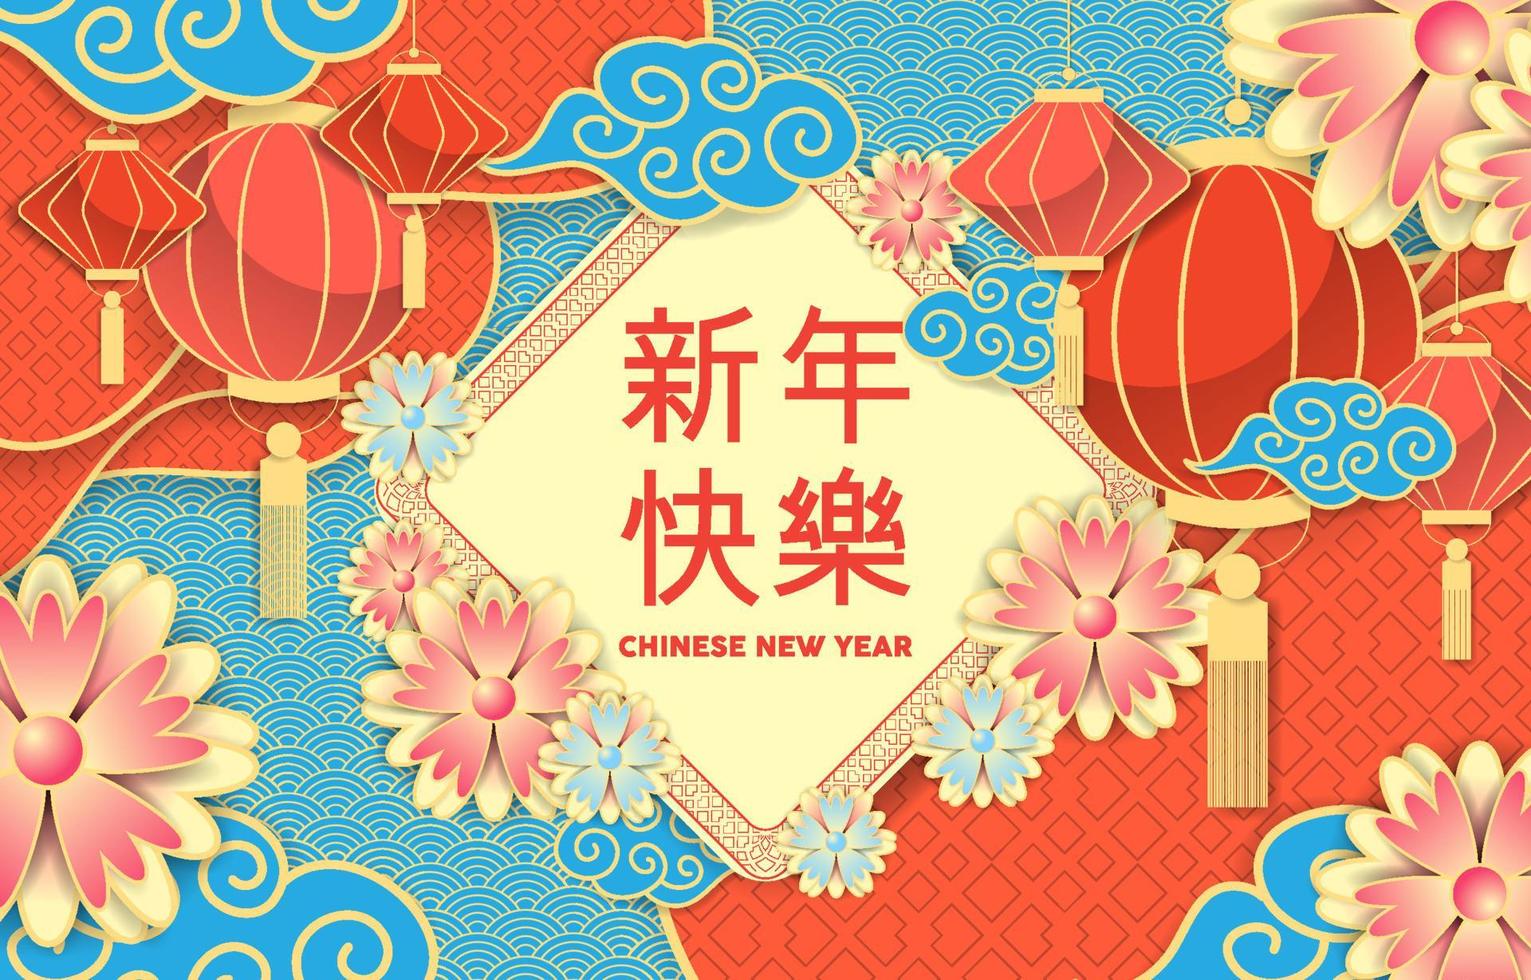 Chinese New Year Celebration Background vector